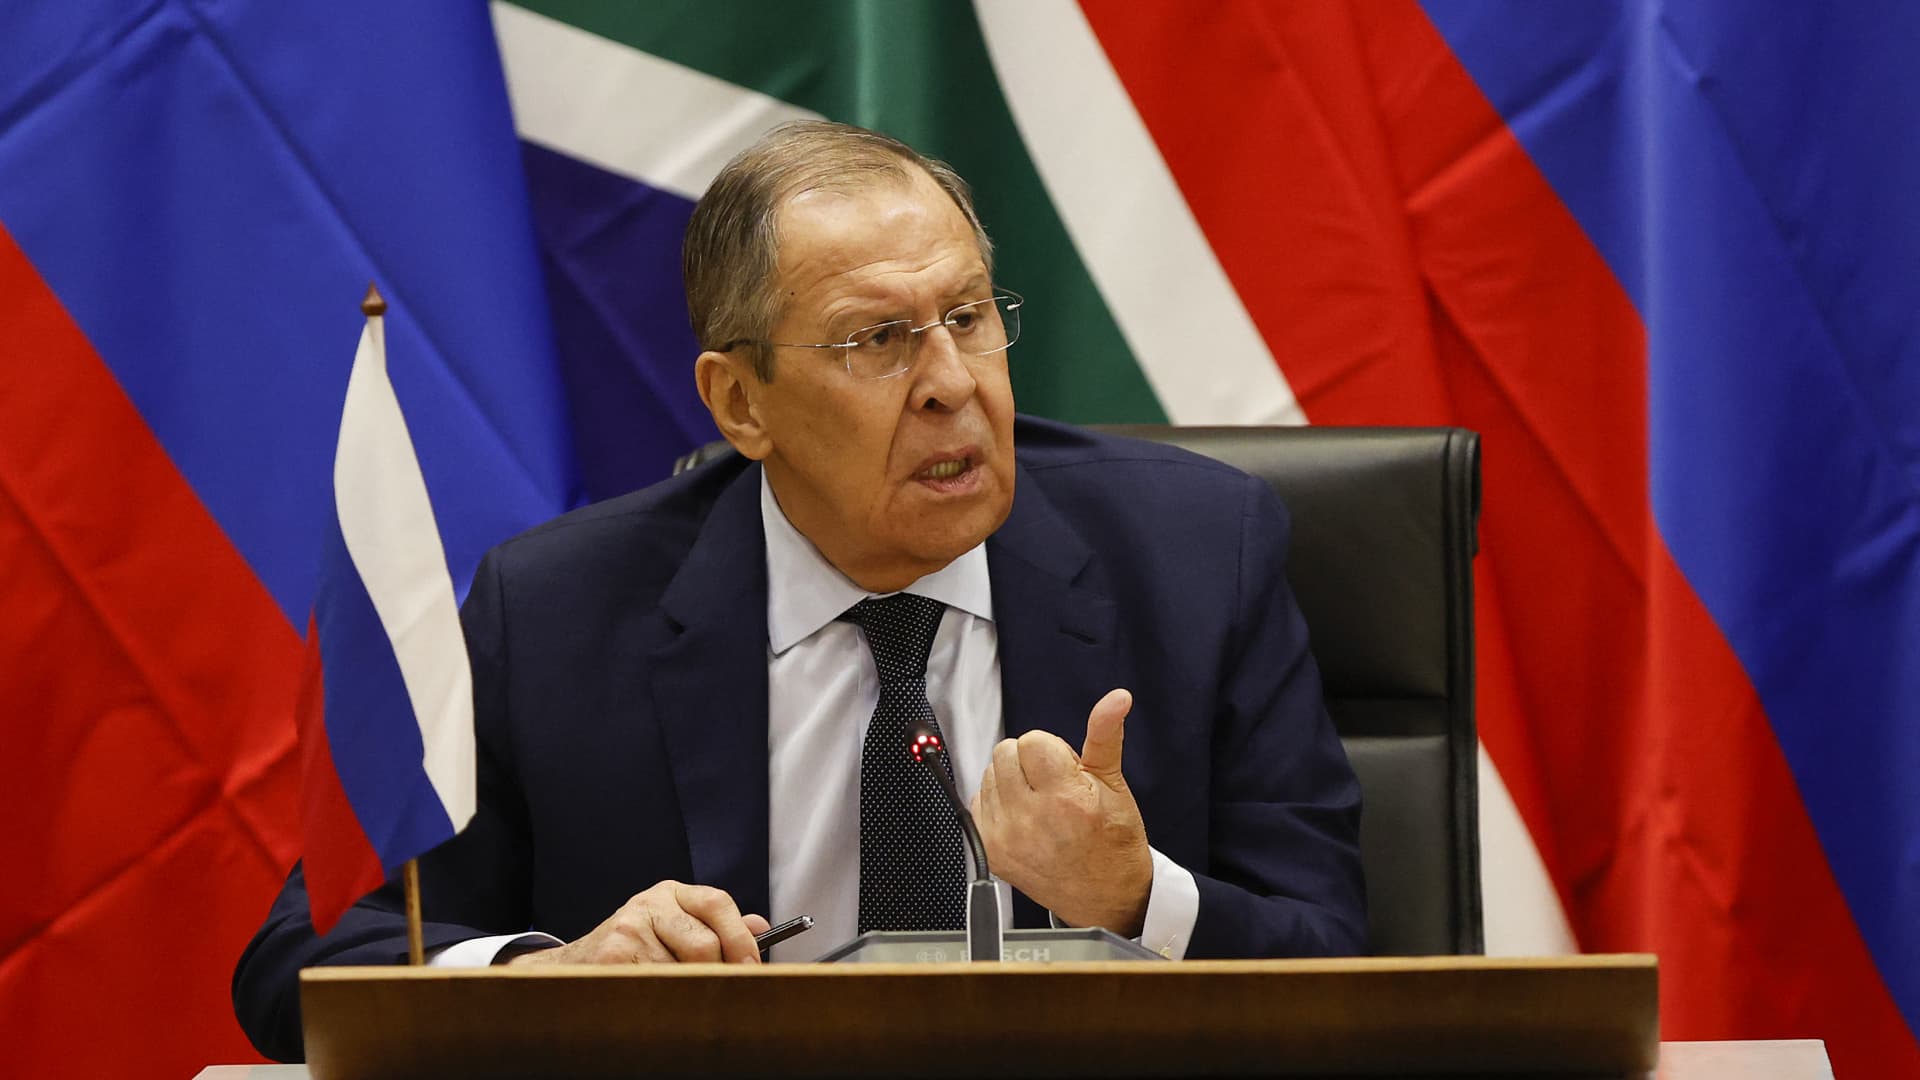 Russian Minister of Foreign Affairs of Sergei Lavrov speaks during a press conference after his meeting with South African Minister of International Relations and Cooperation Naledi Pandor at the OR Tambo Building in Pretoria on January 23, 2023.